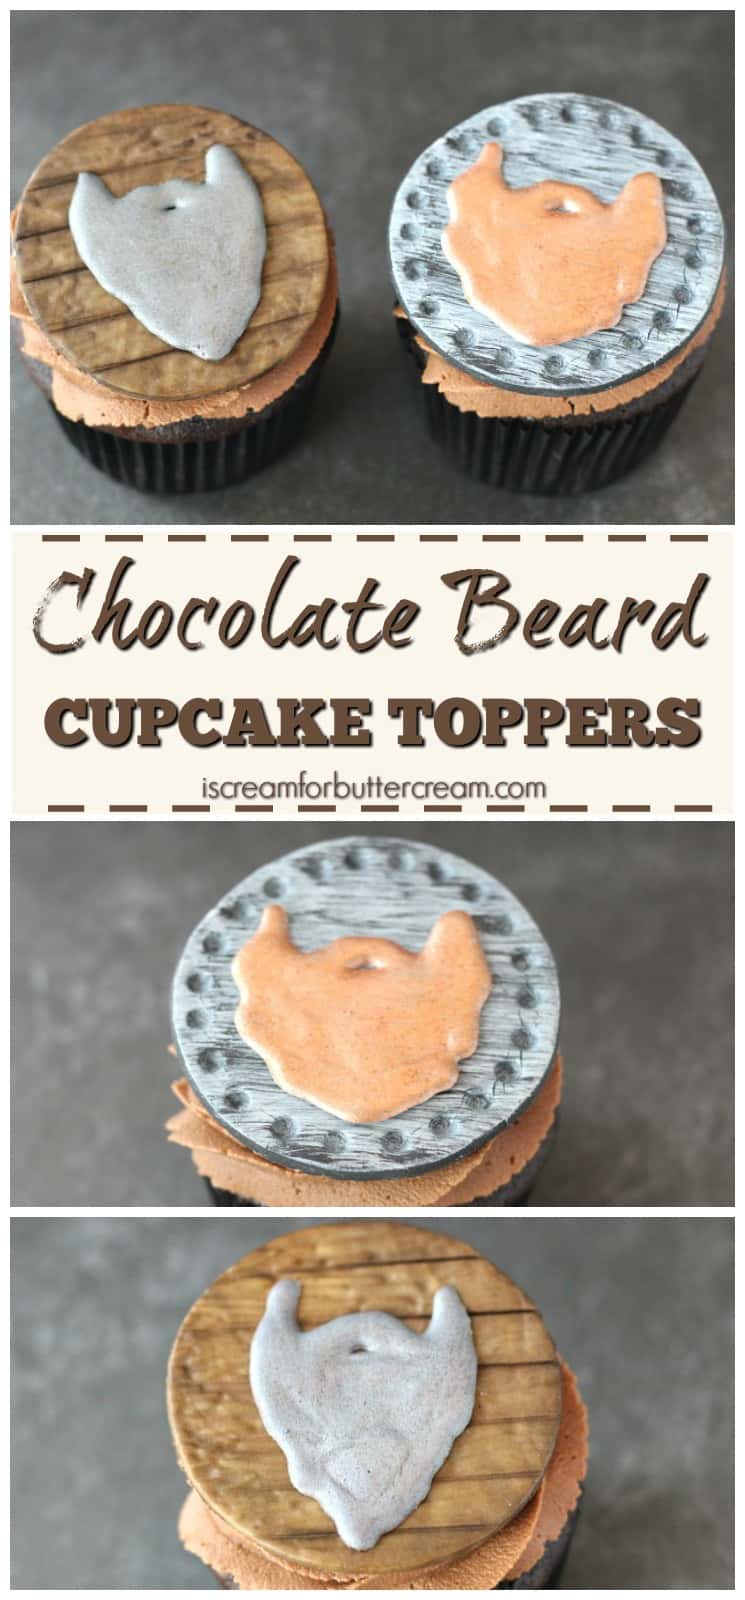 Chocolate Beard Cupcake Toppers Pinterest Graphic